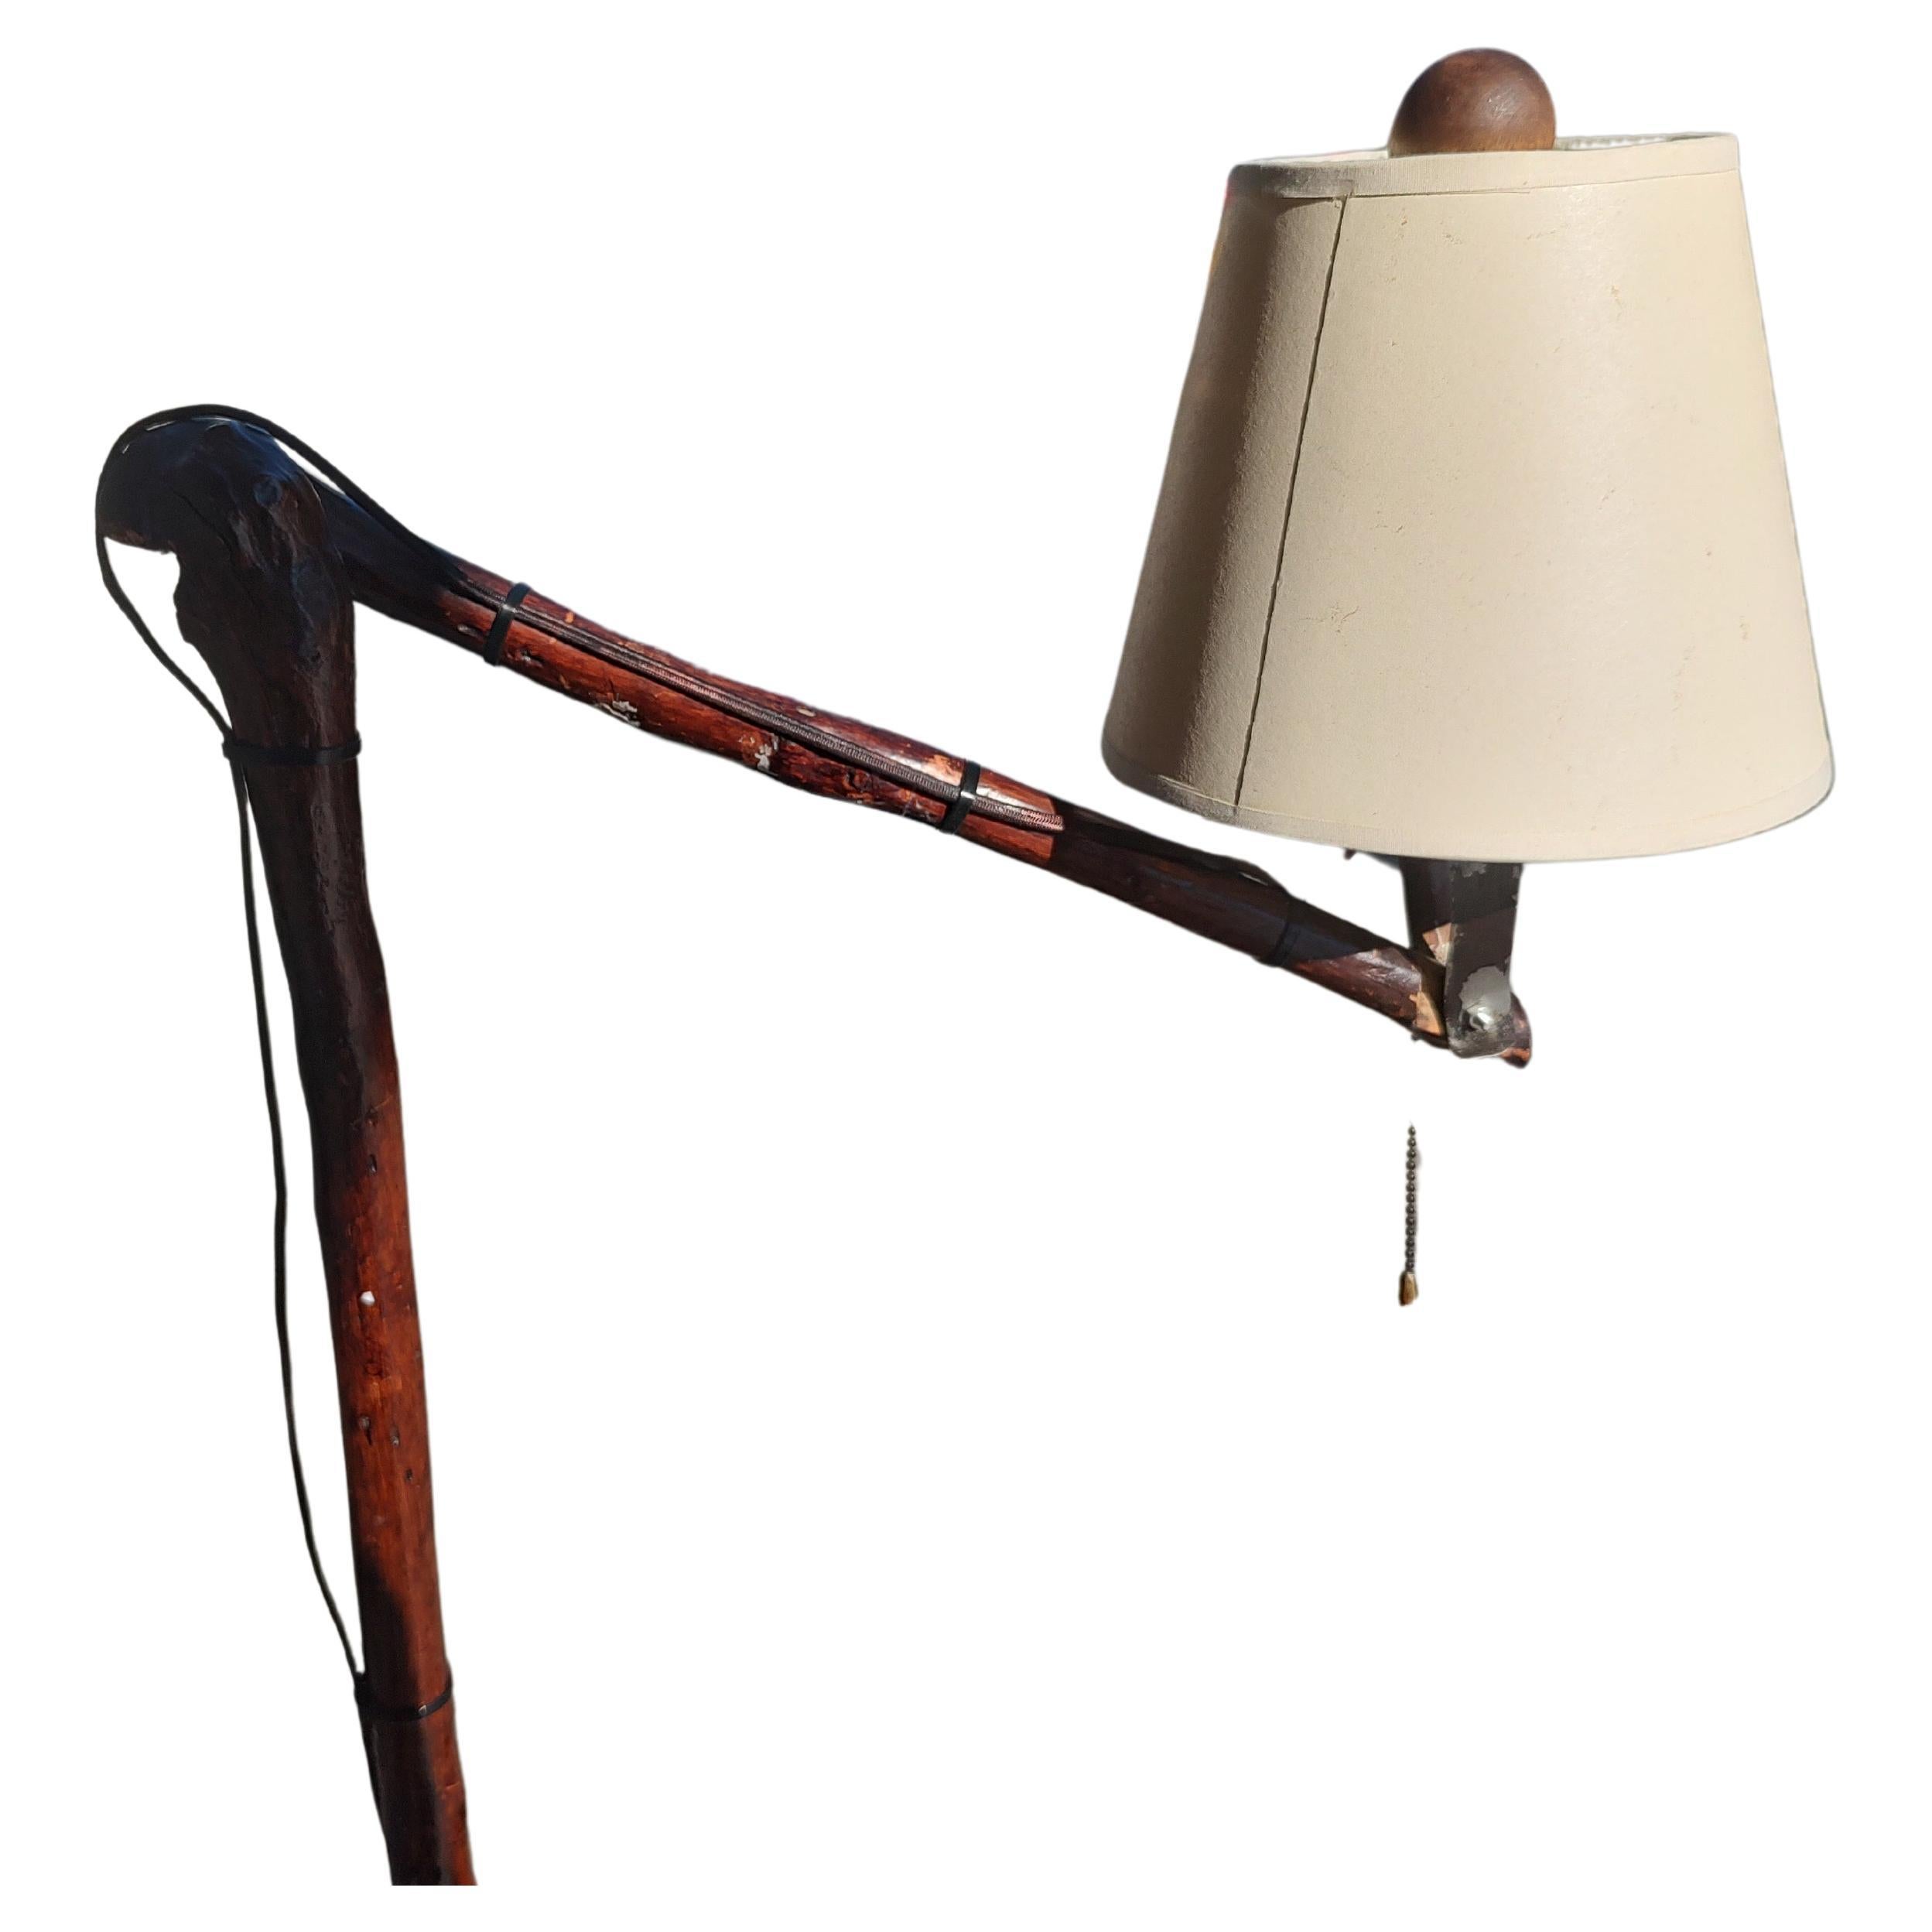 American Adirondack Bent Twig Floor Lamp with Tri Leg Table Base For Sale